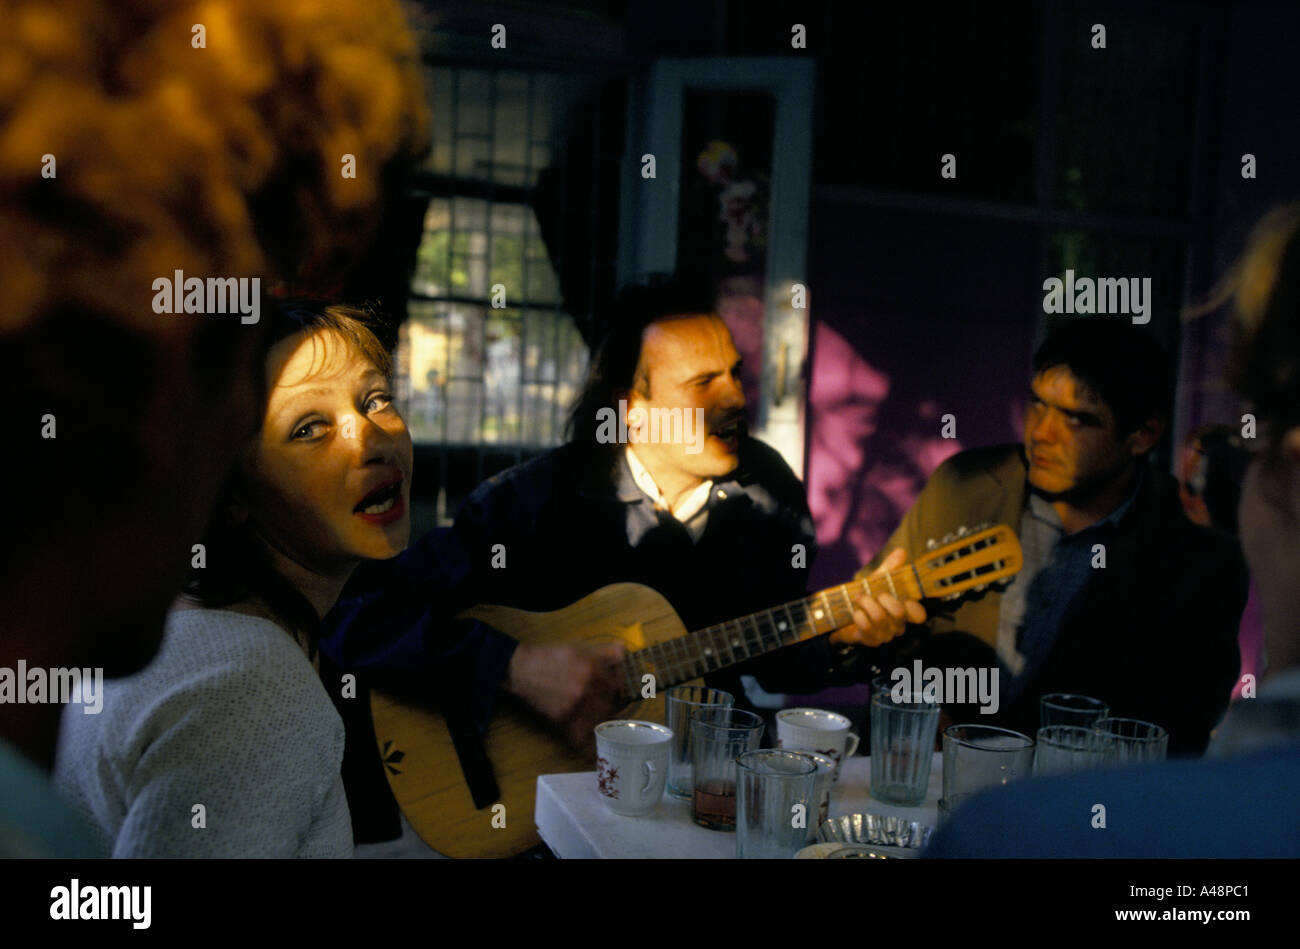 woman singing along with man playing guitar sitting in a cafe in simferopol Crimea ukraine Stock Photo